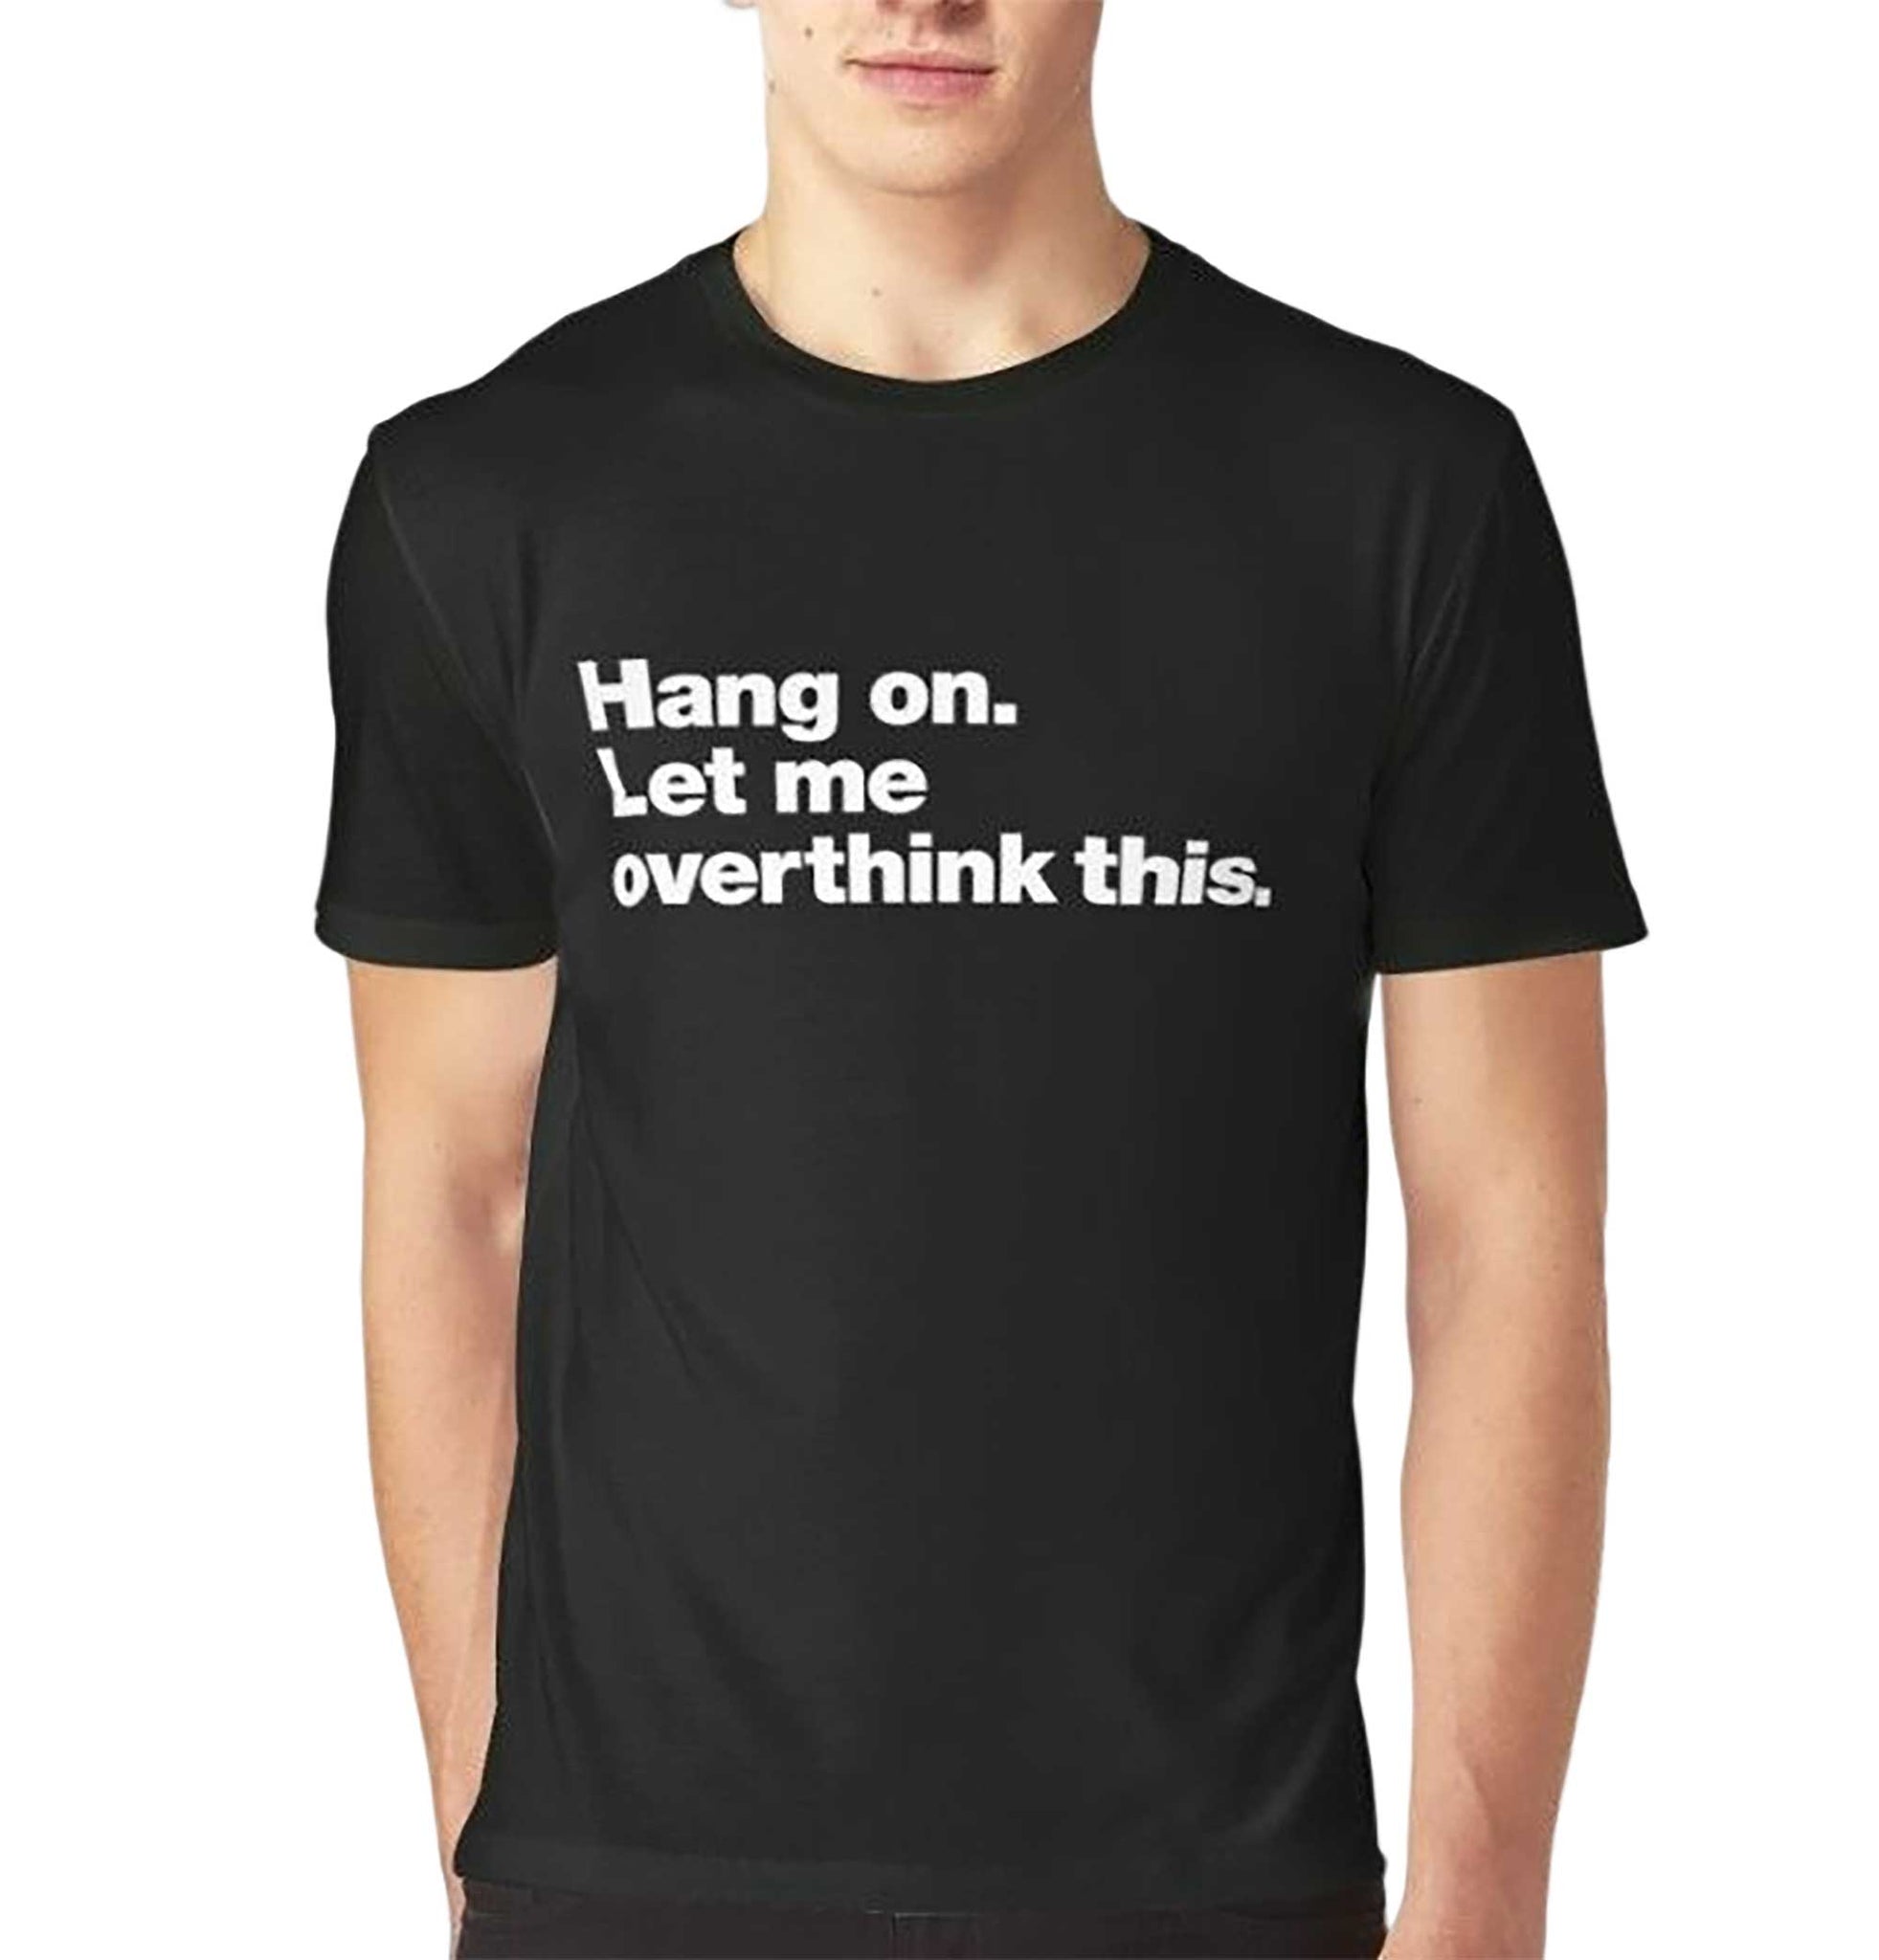 Skitongift-Hang-On-Let-Me-Overthink-This-Classic-T-Shirt-Funny-Shirts-Hoodie-Sweater-Short-Sleeve-Casual-Shirt